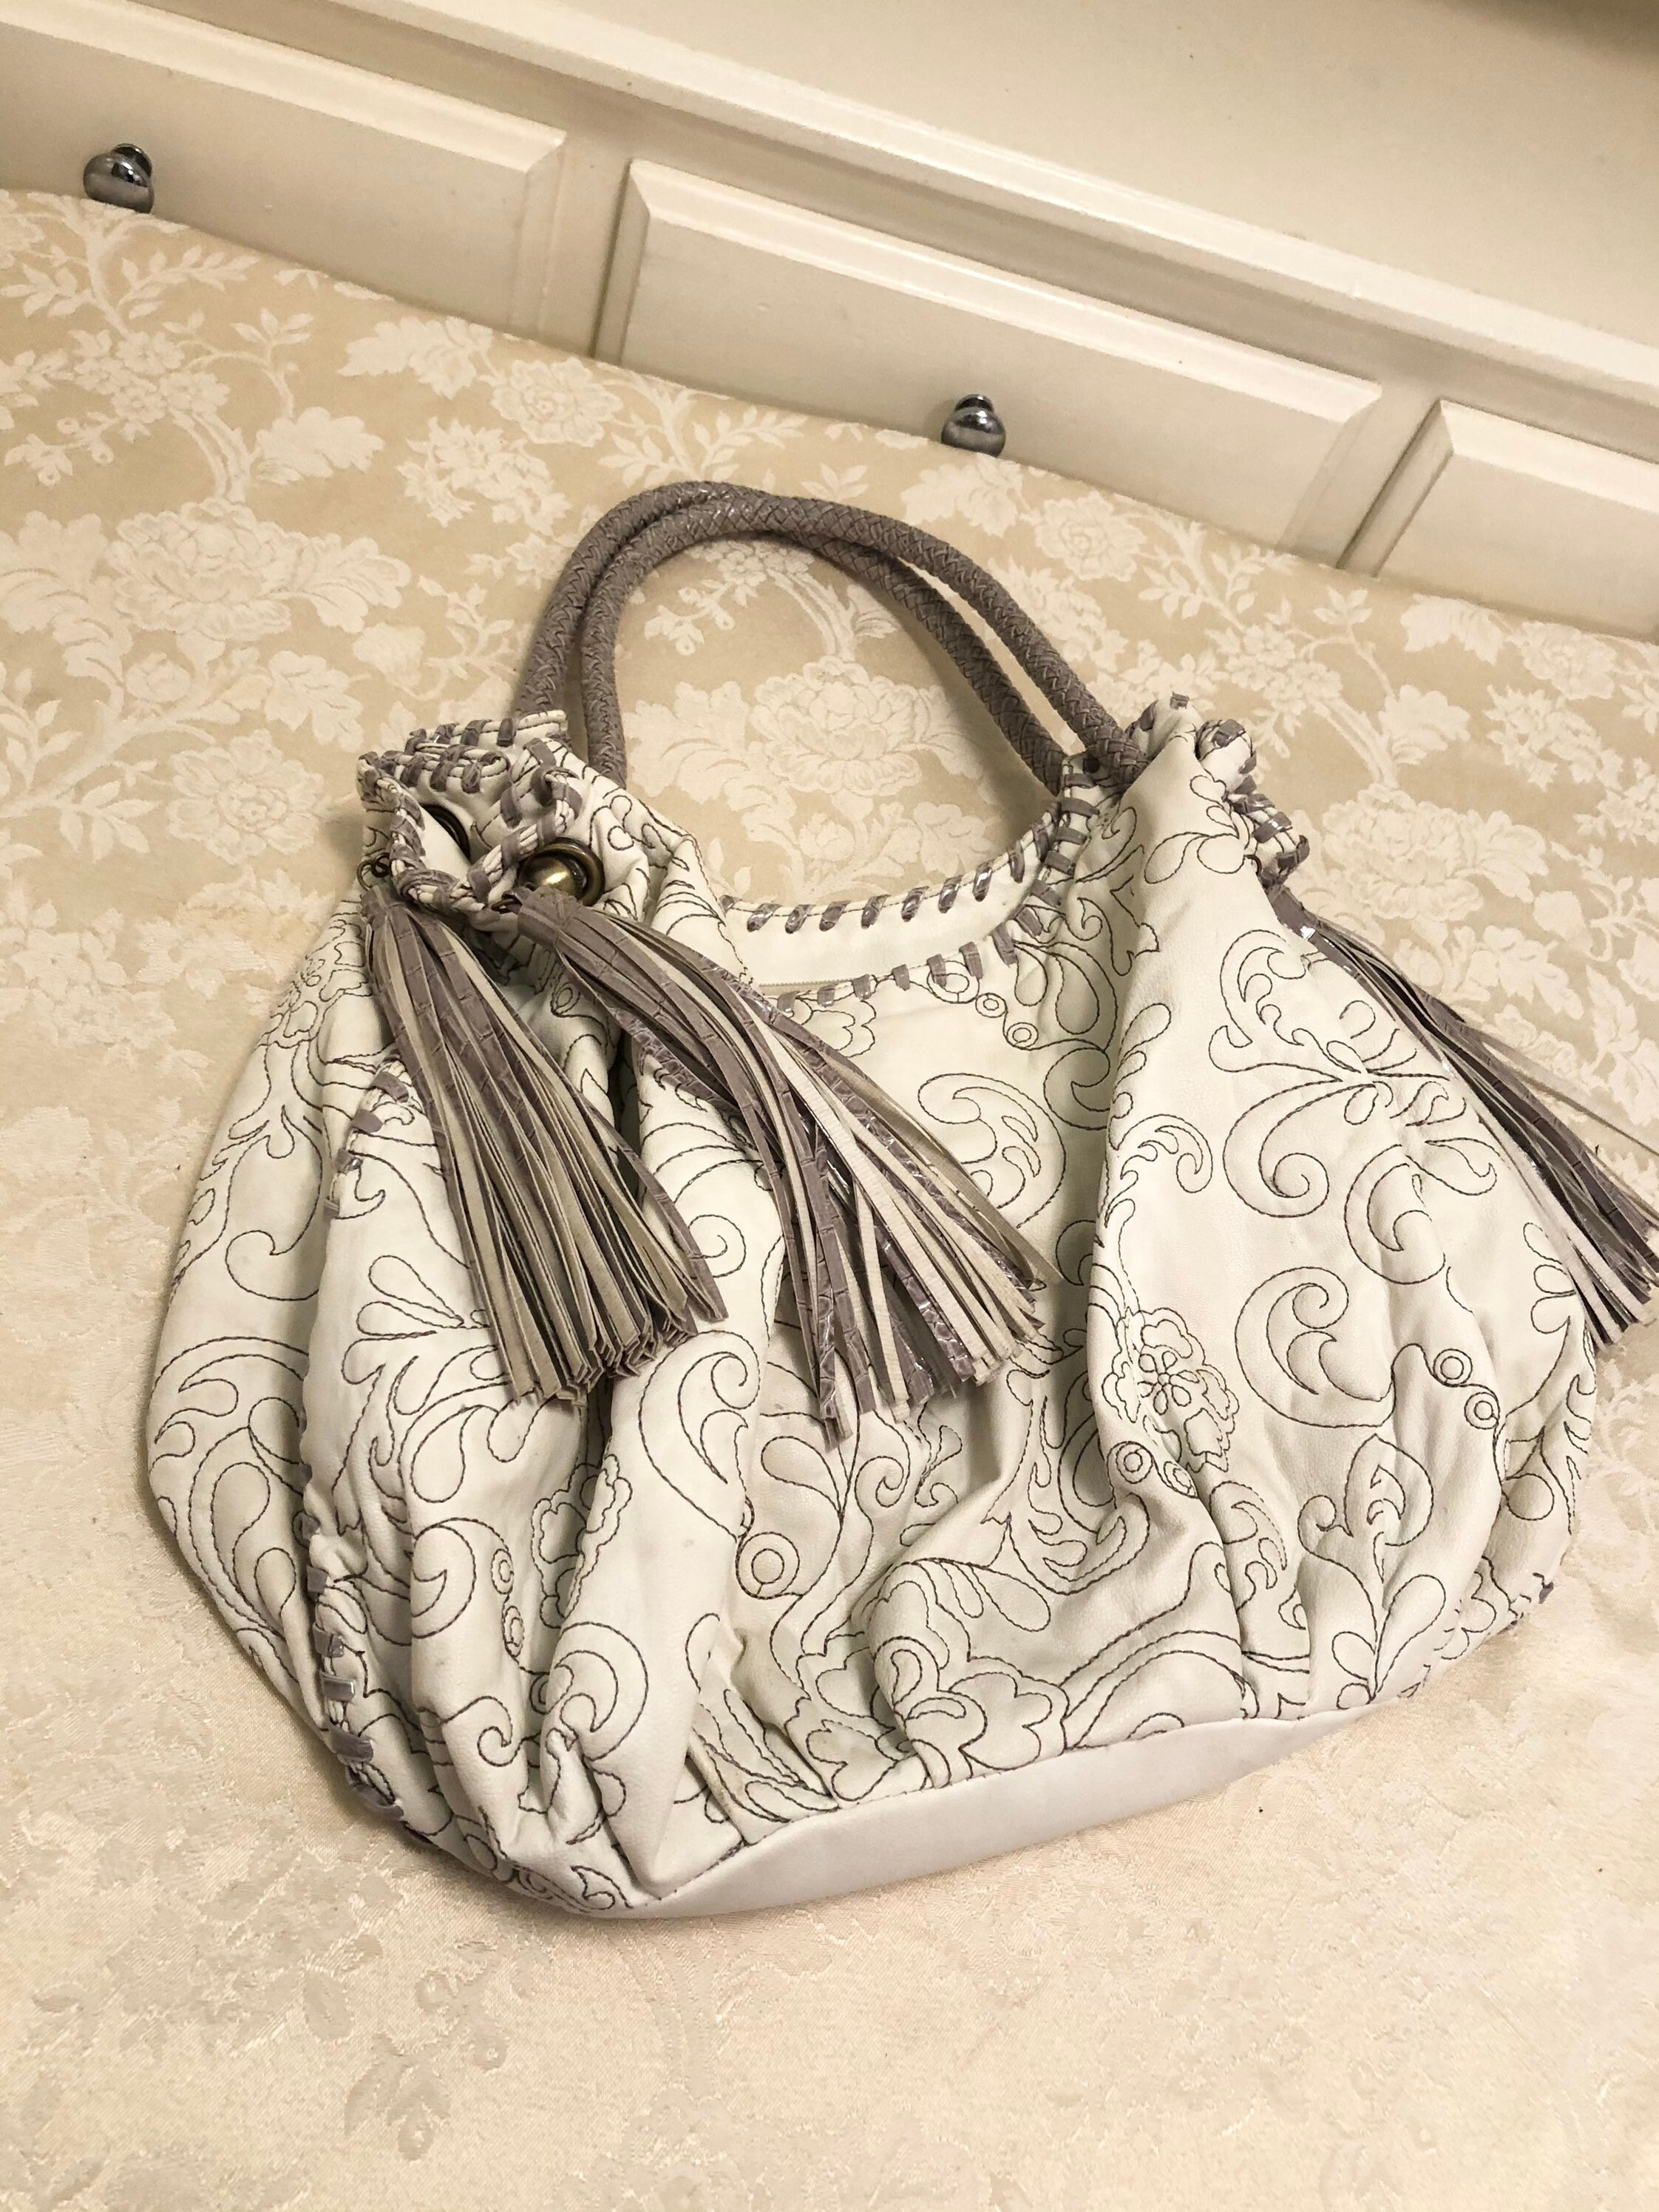 Premium PSD  Bird s eye view of a white quilted purse amidst grey